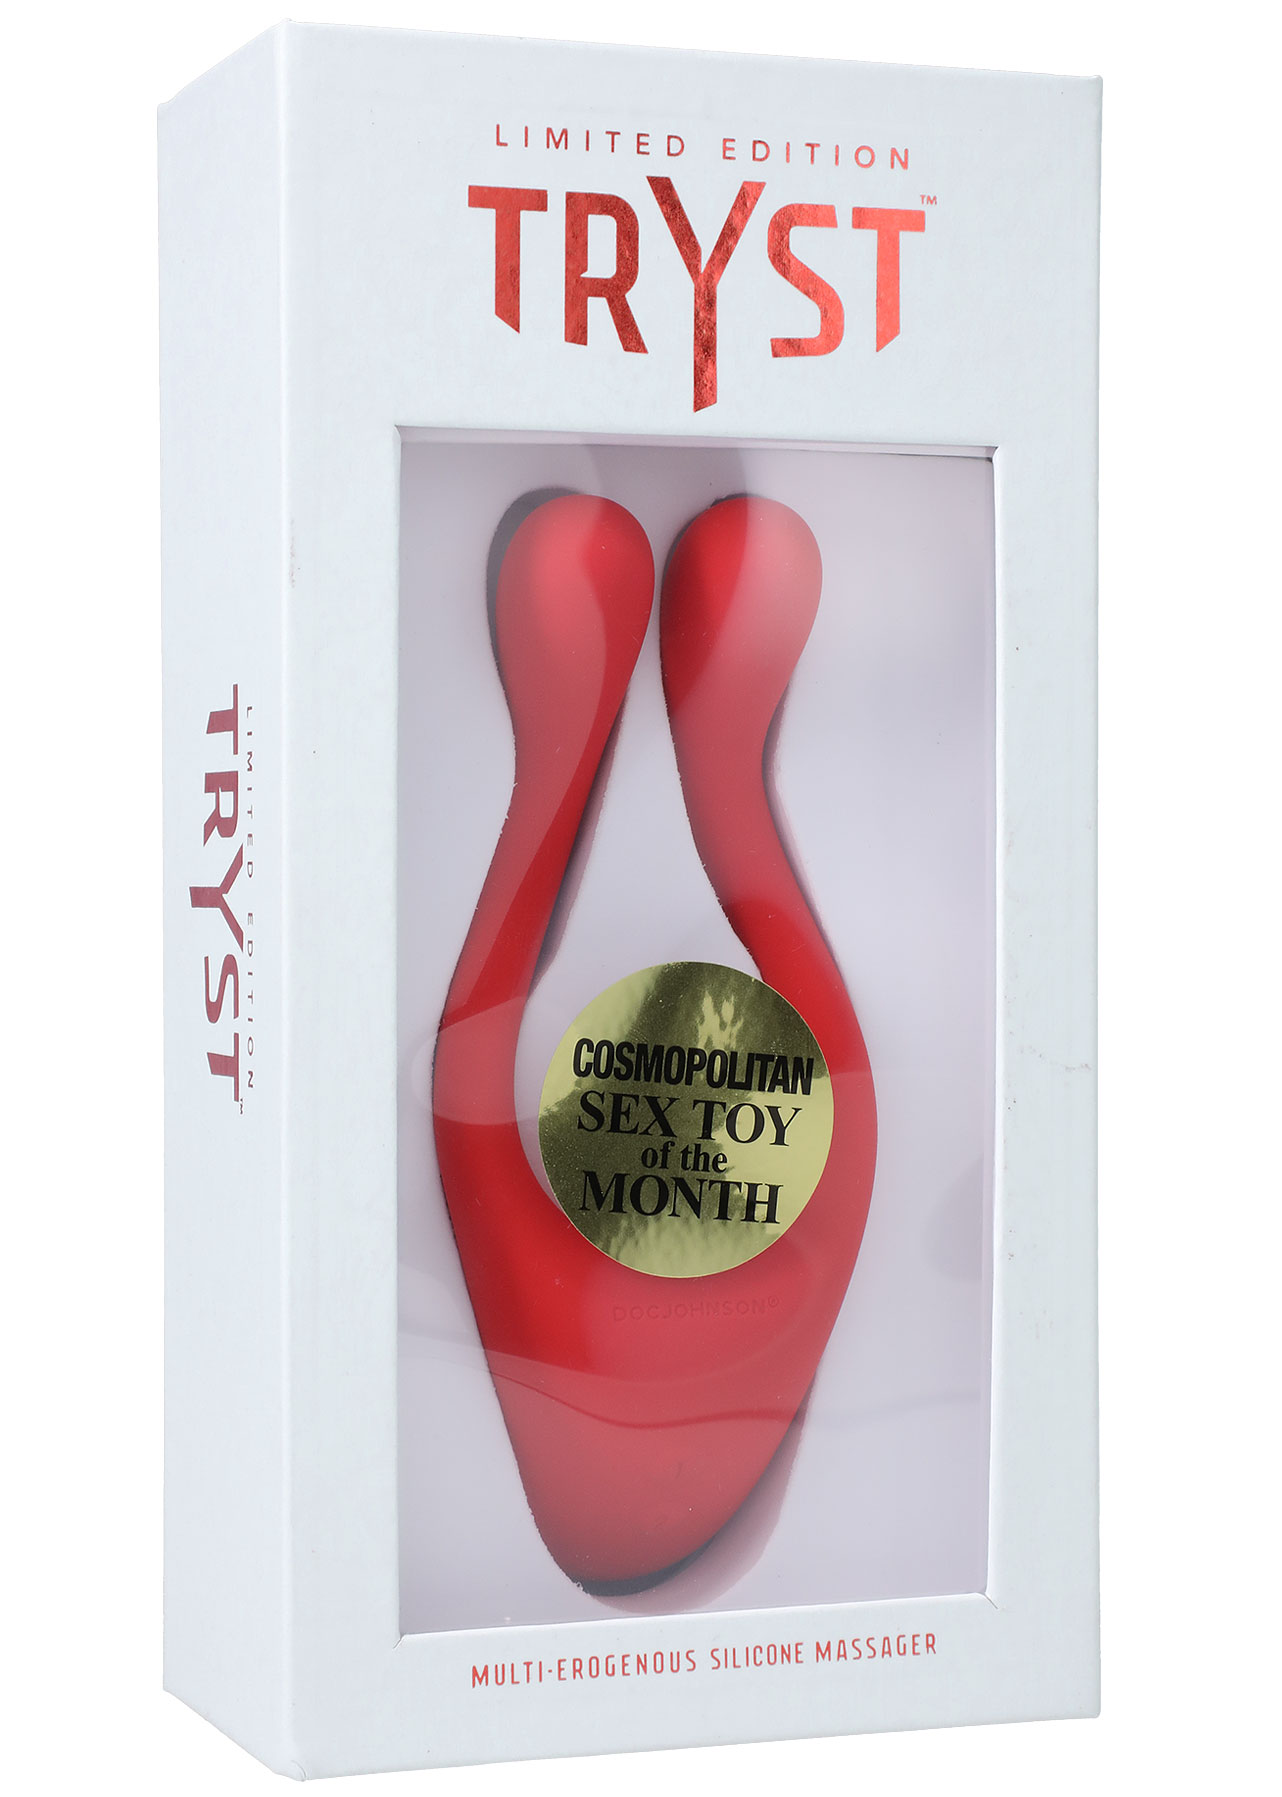 Dj0990 97 Bx Tryst Multi Erogenous Zone Massager Limited Edition